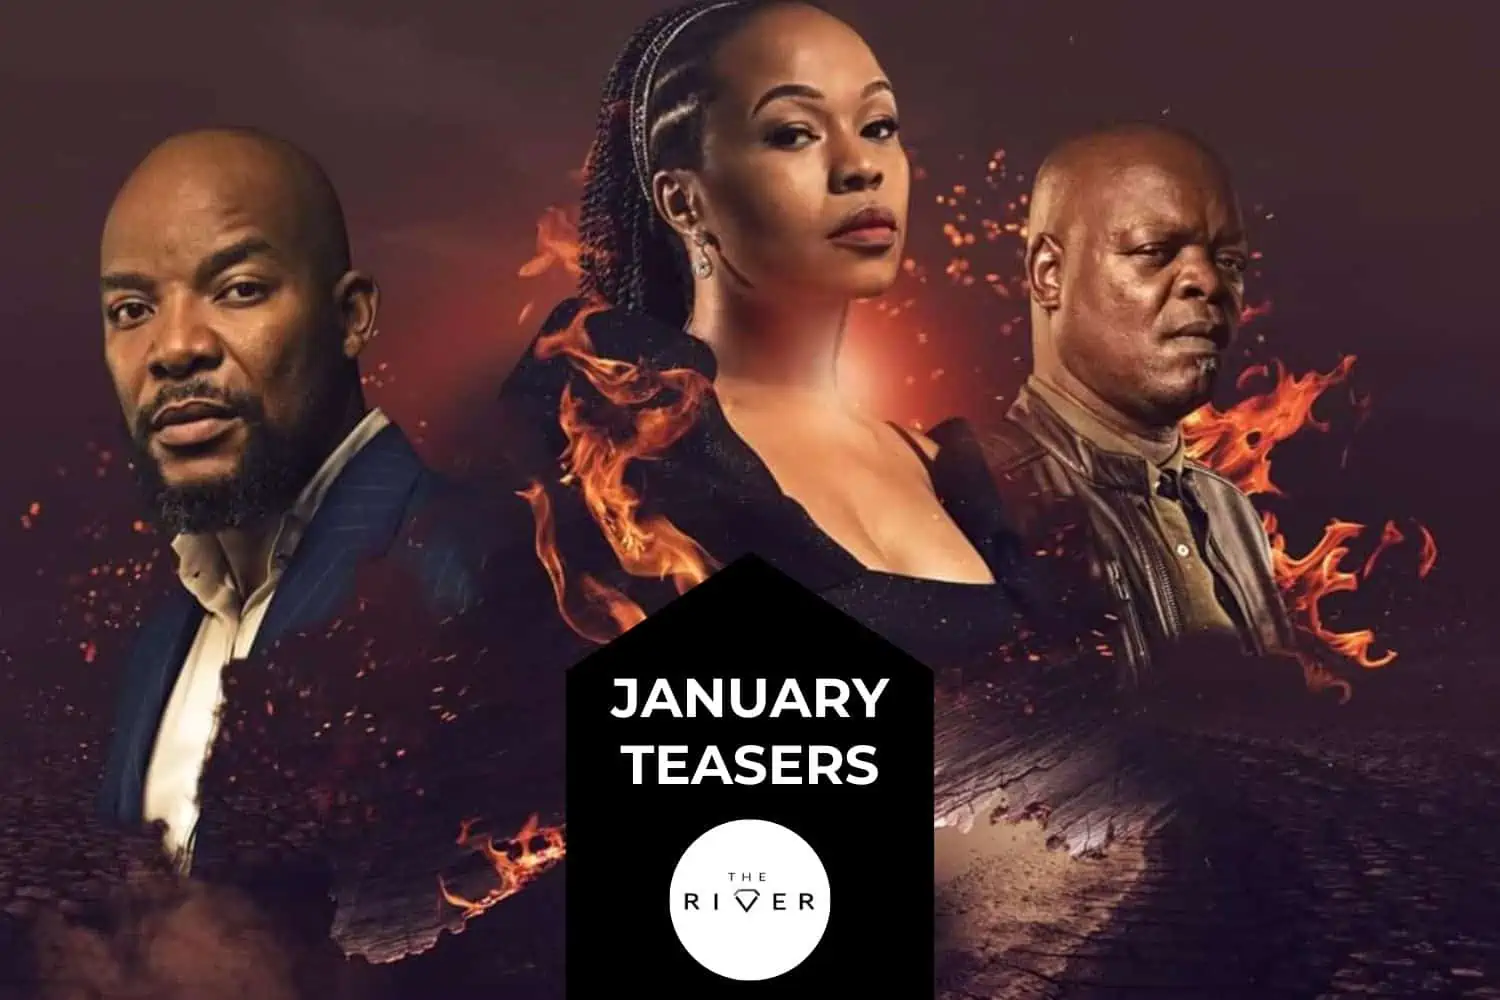 The River January Teasers